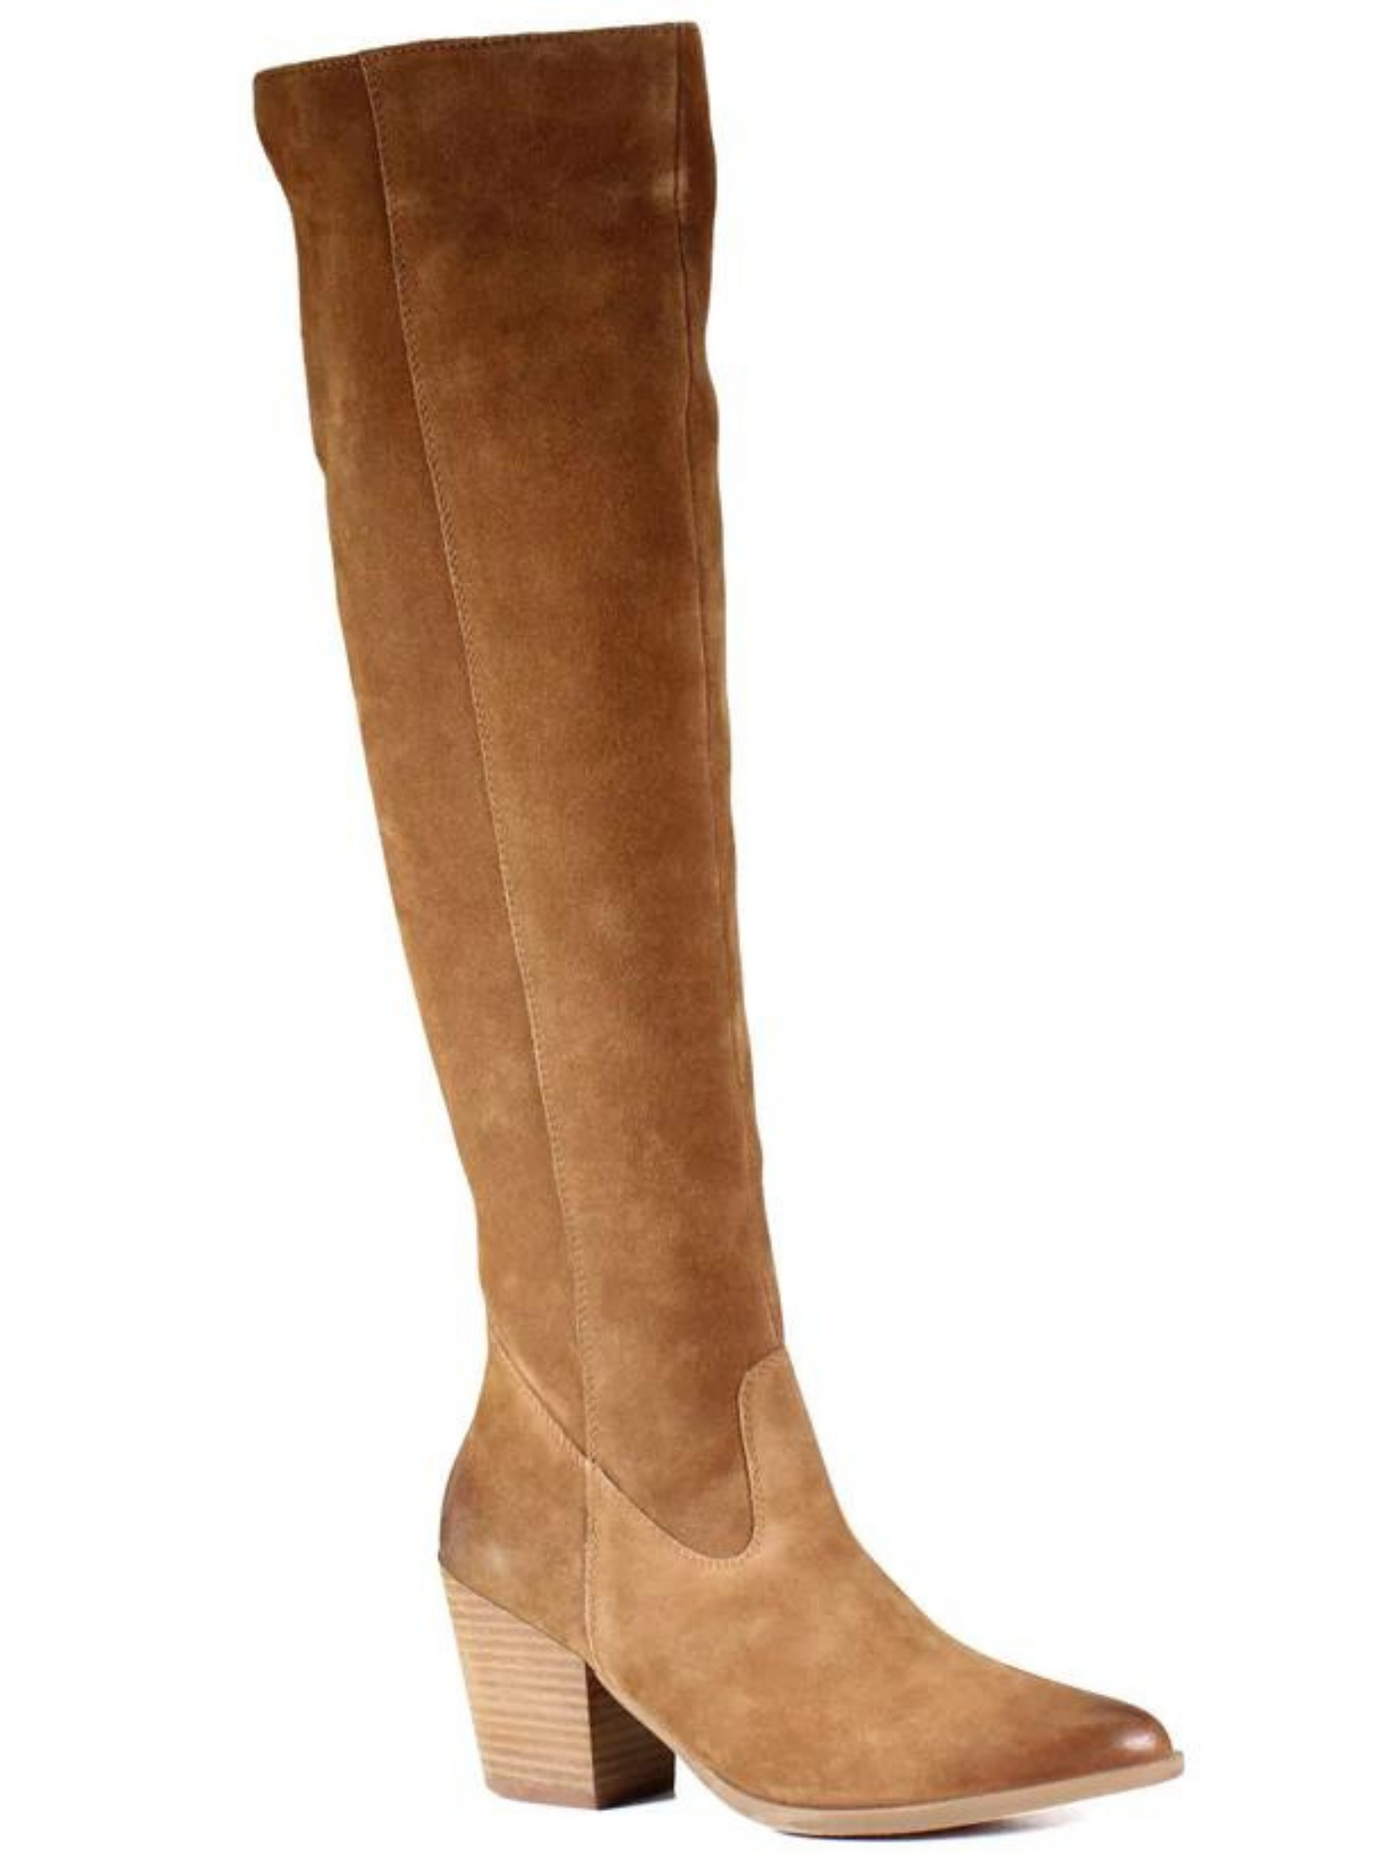 Diba True Full Suede Knee-High Boots side view without zipper.